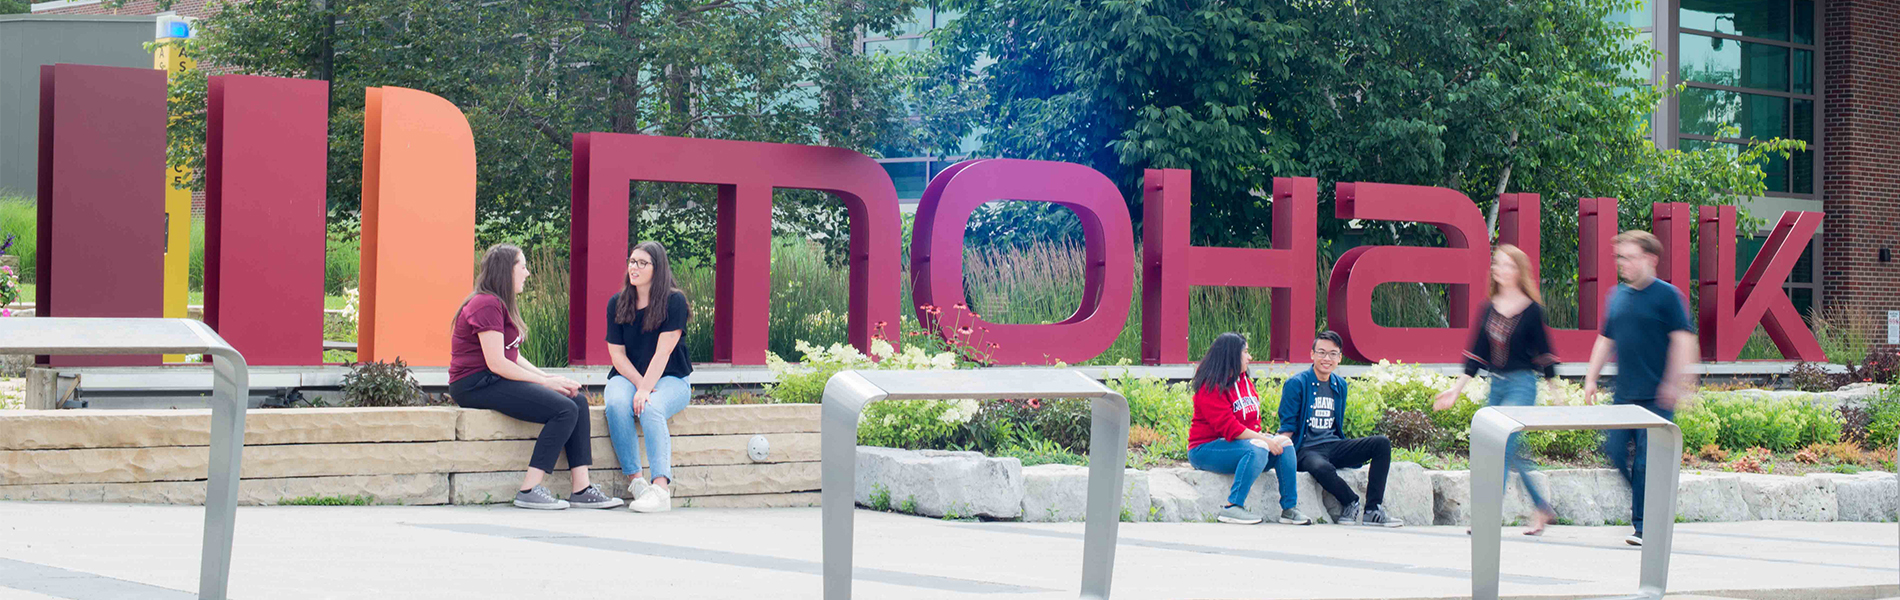 students sitting outside near the Mohawk sign